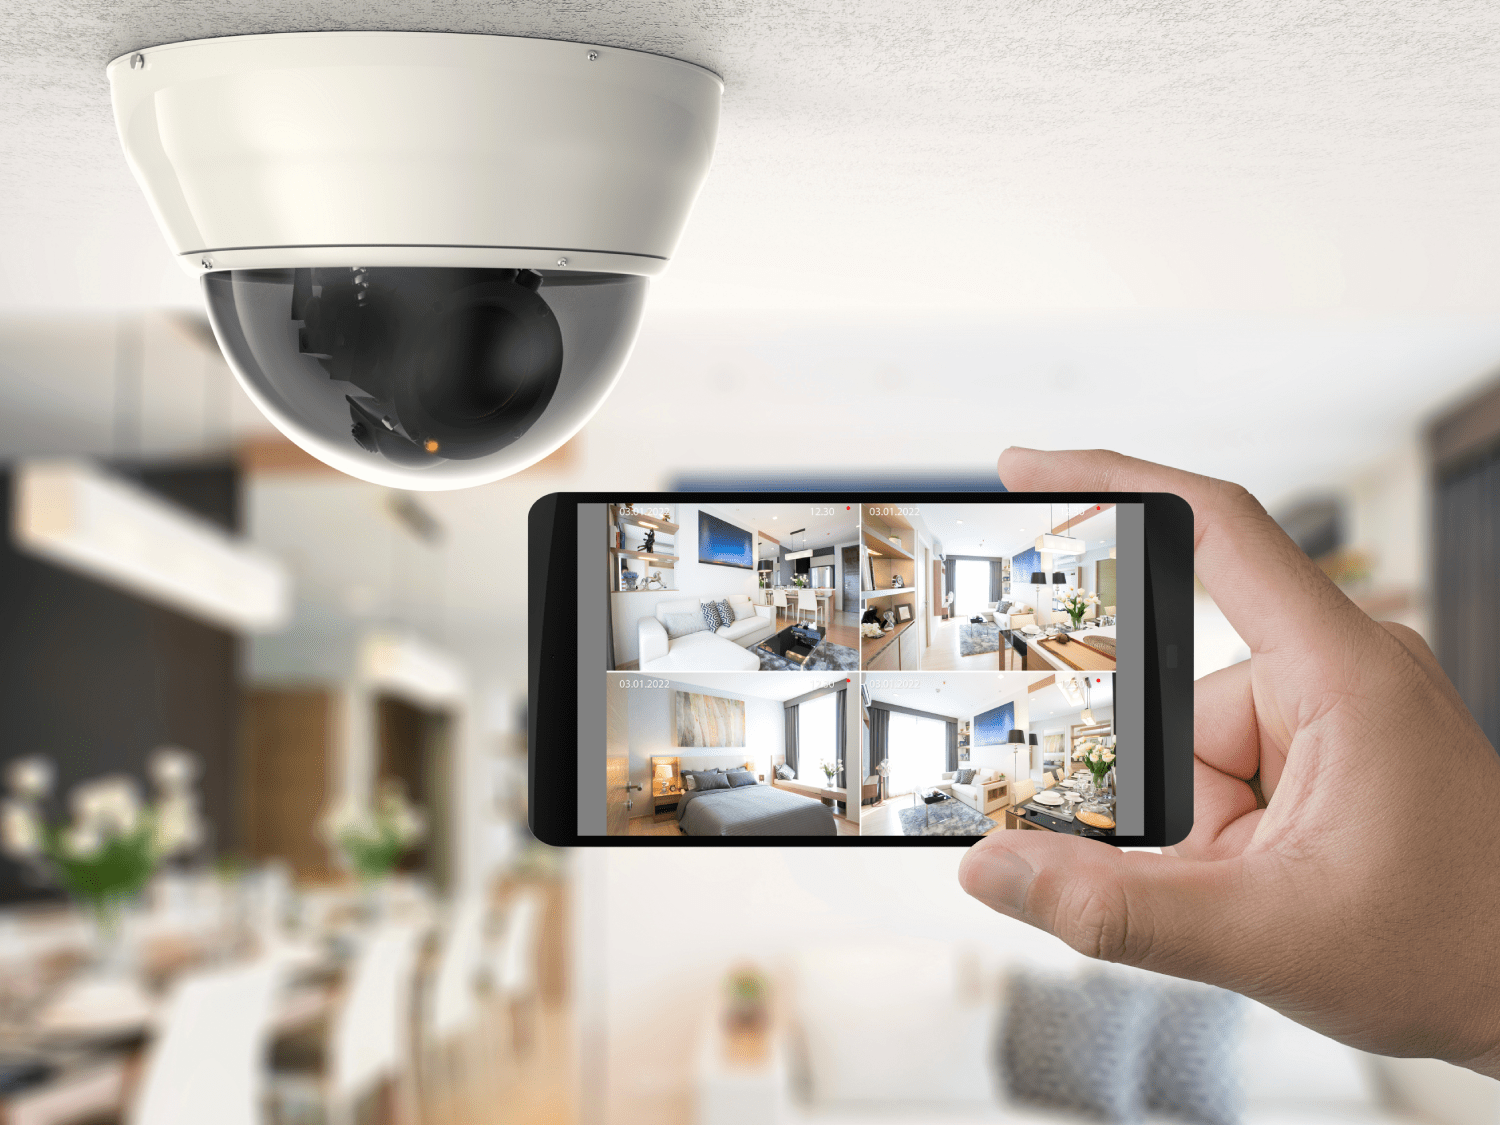 Hand Holding Mobile Connect with Security Camera